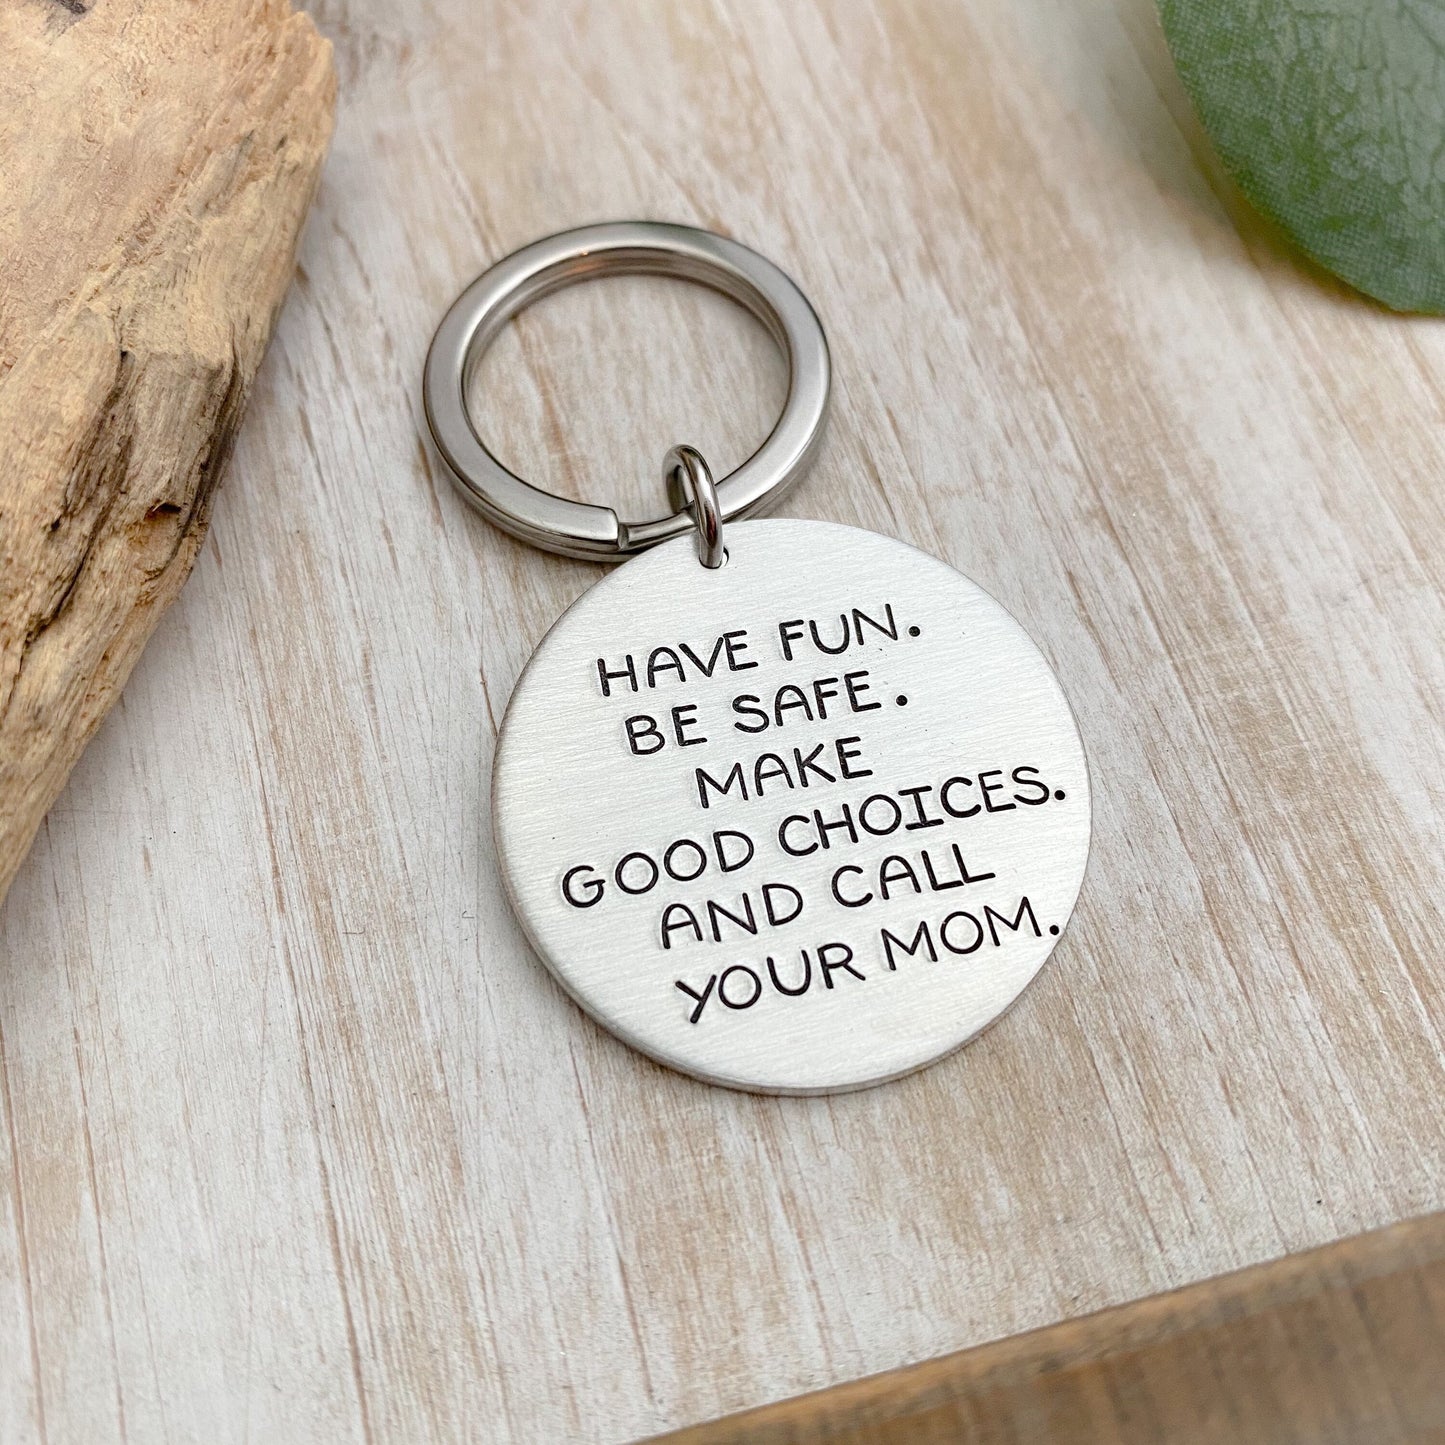 New Driver Keychain--Drive Safe Keychain--Be Safe Keychain--Sweet 16 Gift--Son Gift--Have Fun. Be Safe. Make Good Choices and Call Your Mom